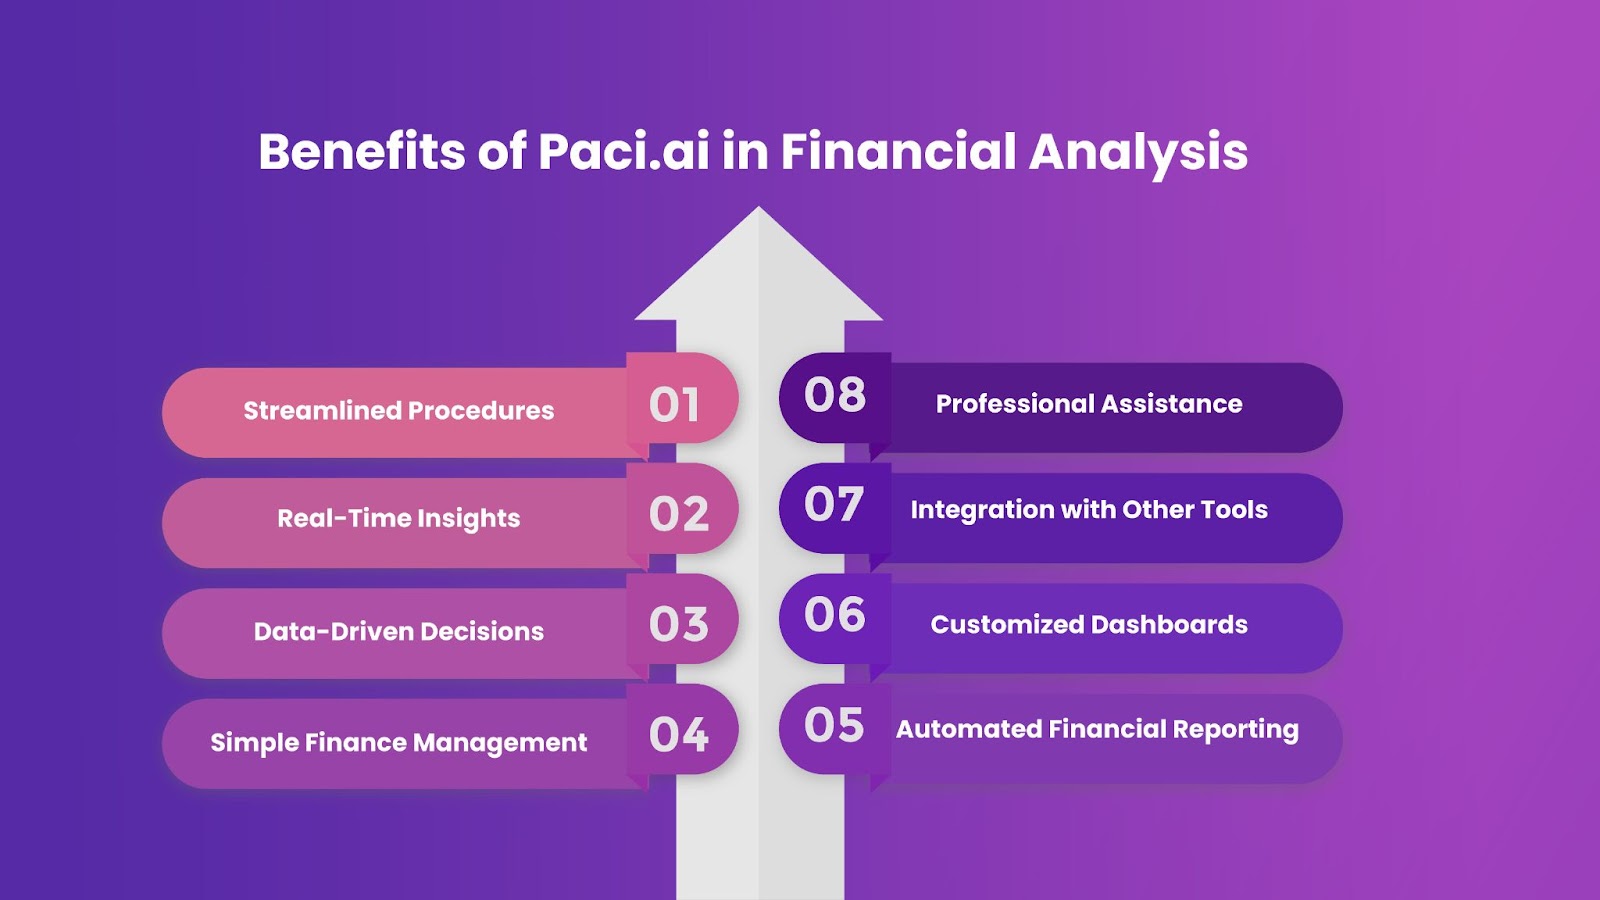 Benefits of Paci.ai in Financial Analysis